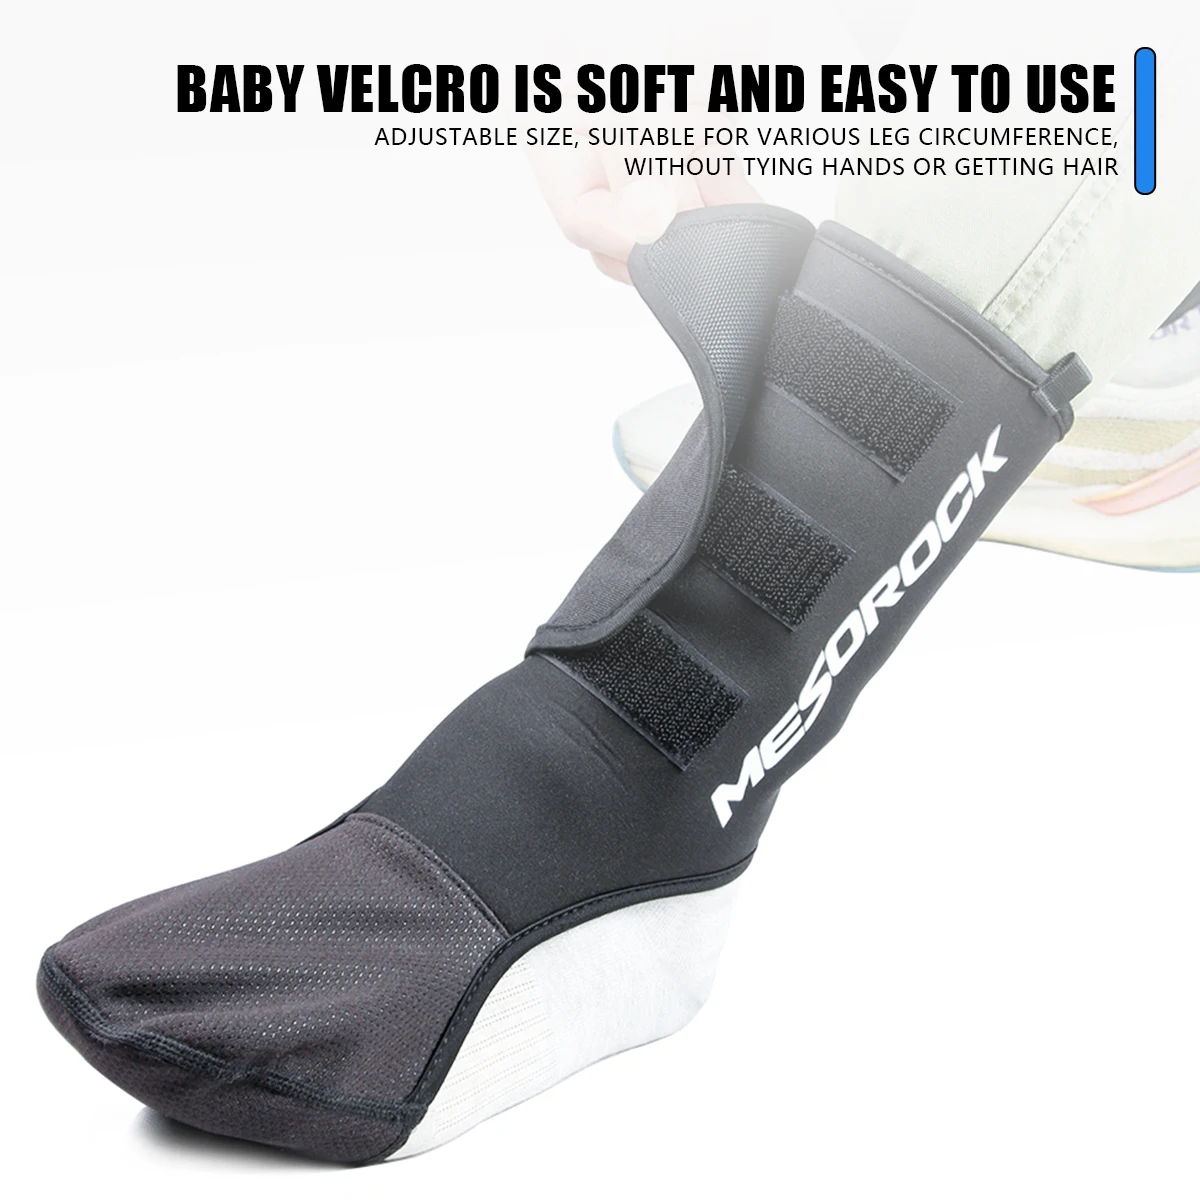 Windproof Ankle Protector for Motorcycle Riding, Outdoor Skiing, Warm Leg Covers Velvet Foot Covers, Cold-proof Equipment Winter